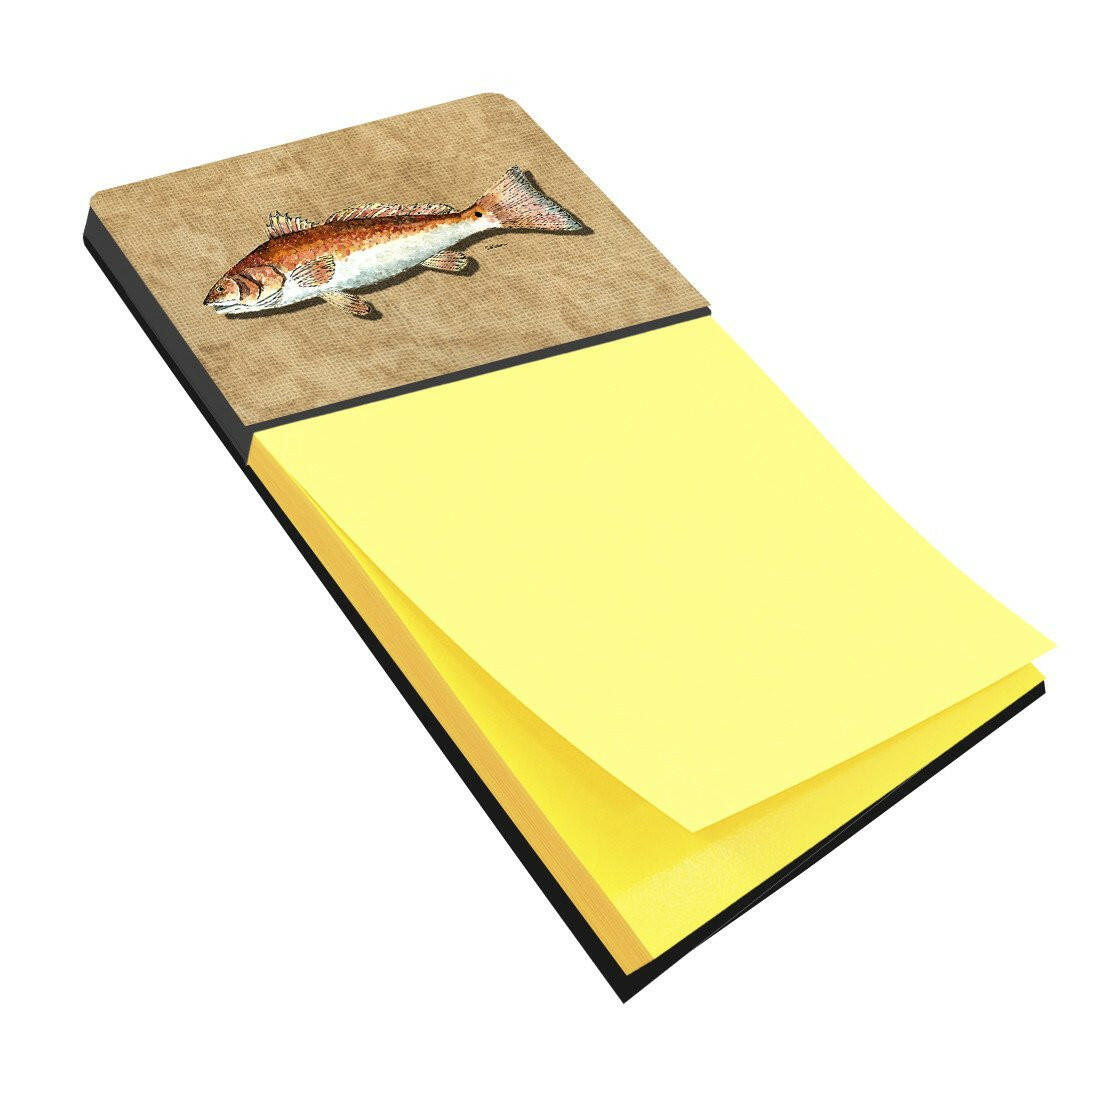 Red Fish Refiillable Sticky Note Holder or Postit Note Dispenser 8807SN by Caroline's Treasures